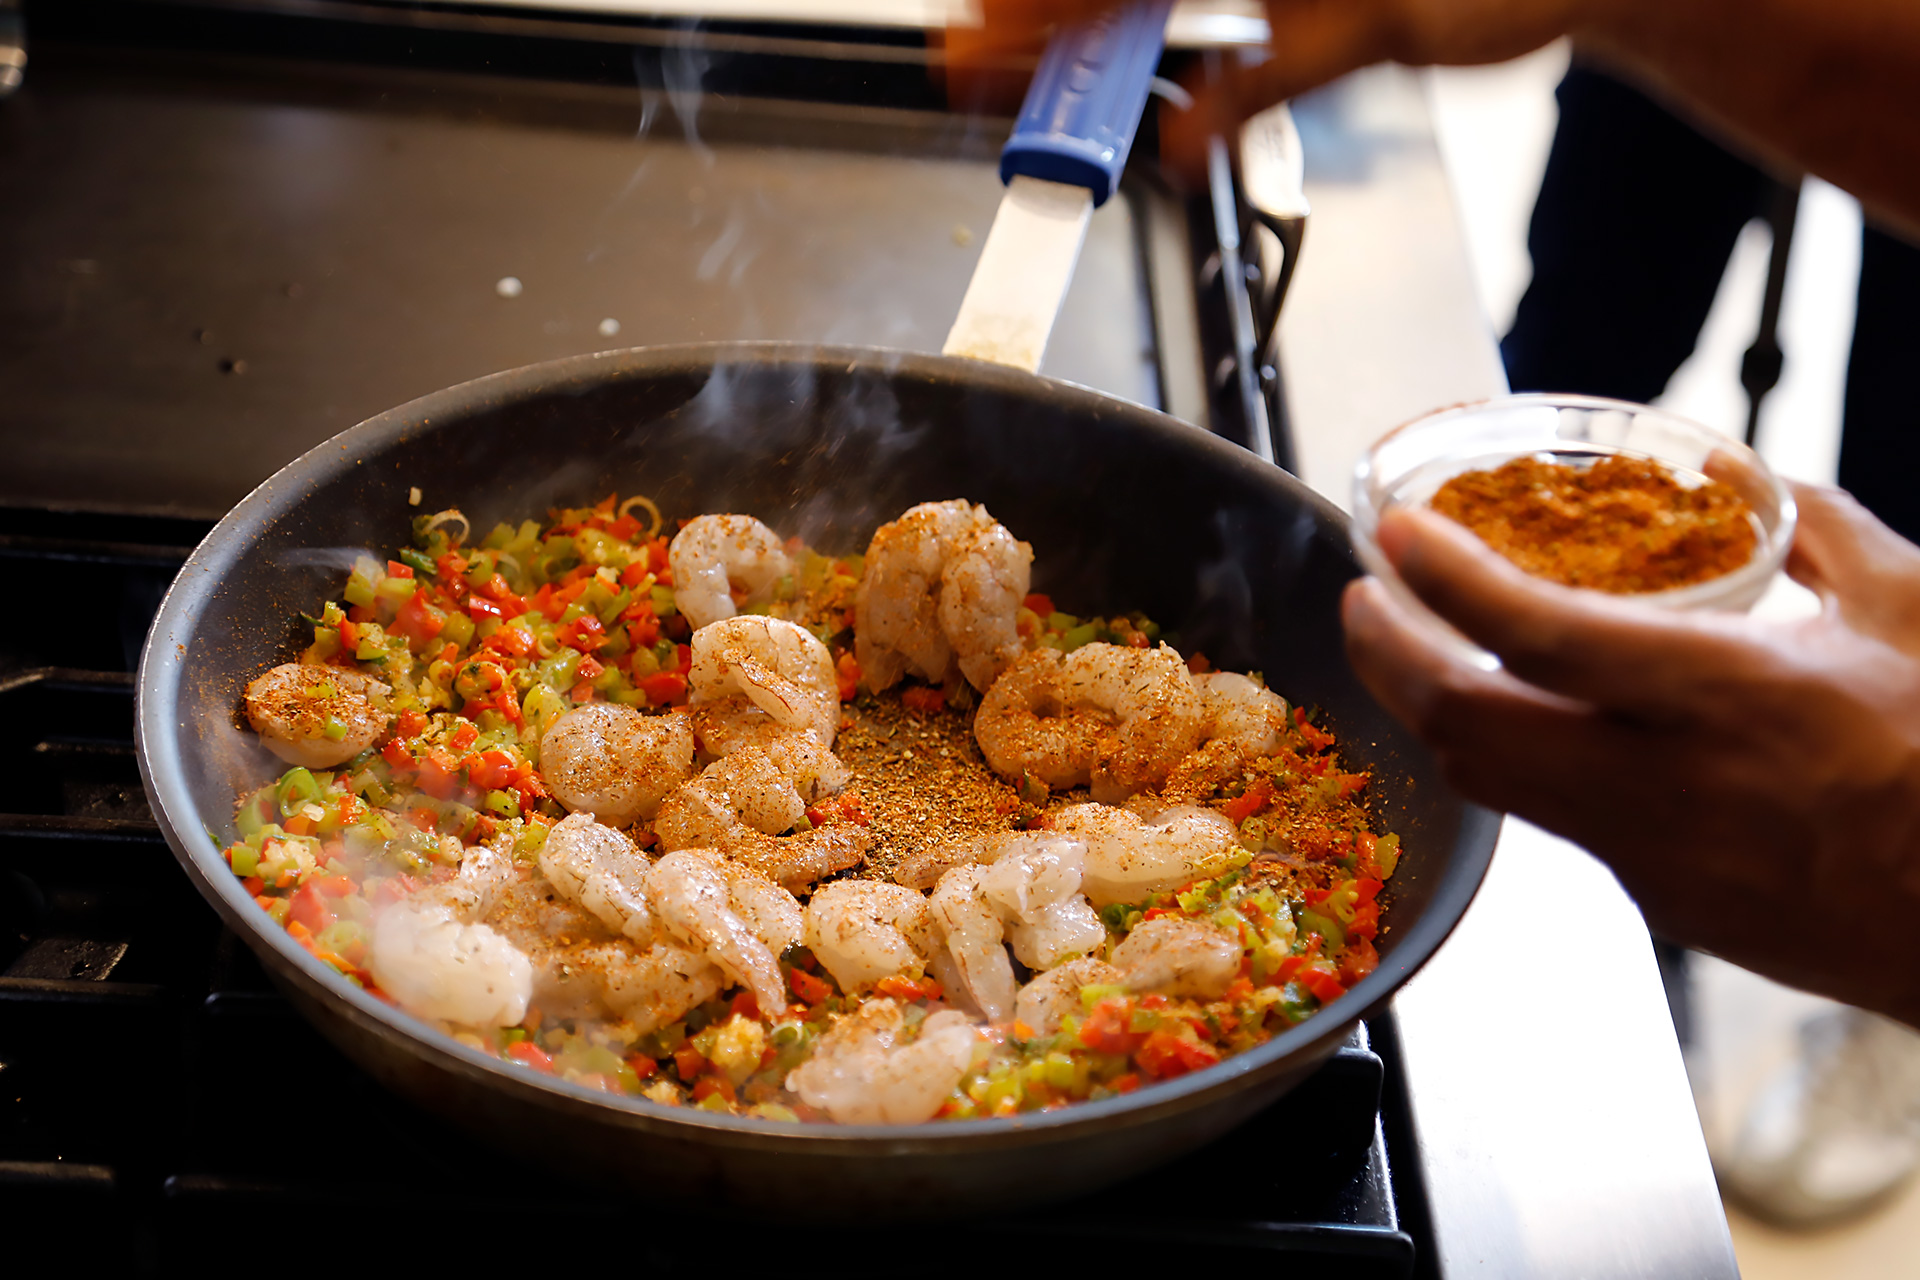 Turn shrimp and sprinkle with Creole spice then sauté until vegetables are softened, about five minutes.